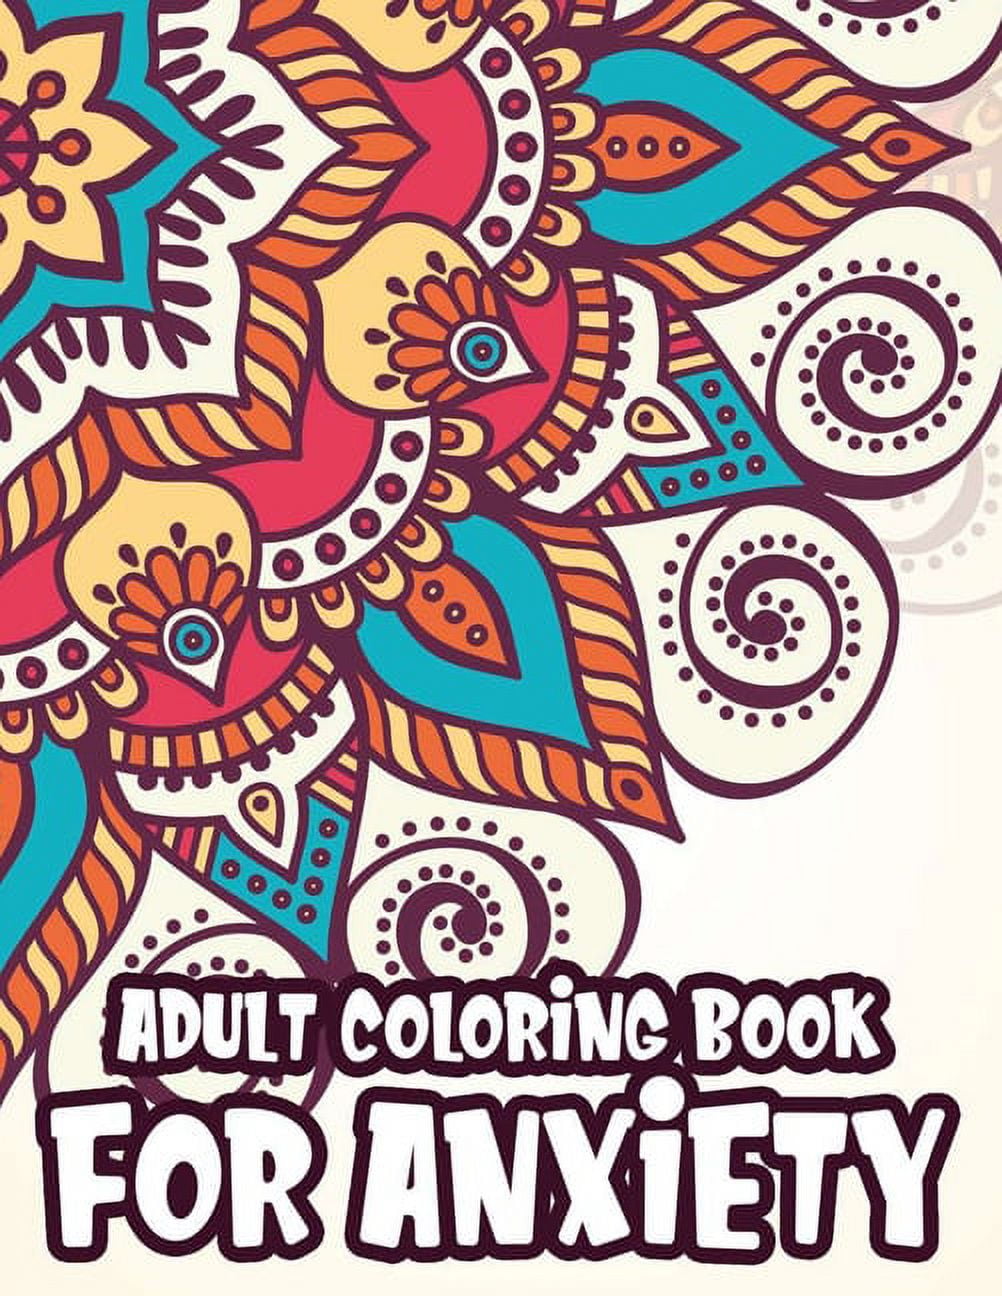 Achieve A Sense Of Balance While Coloring: Calming Coloring Books